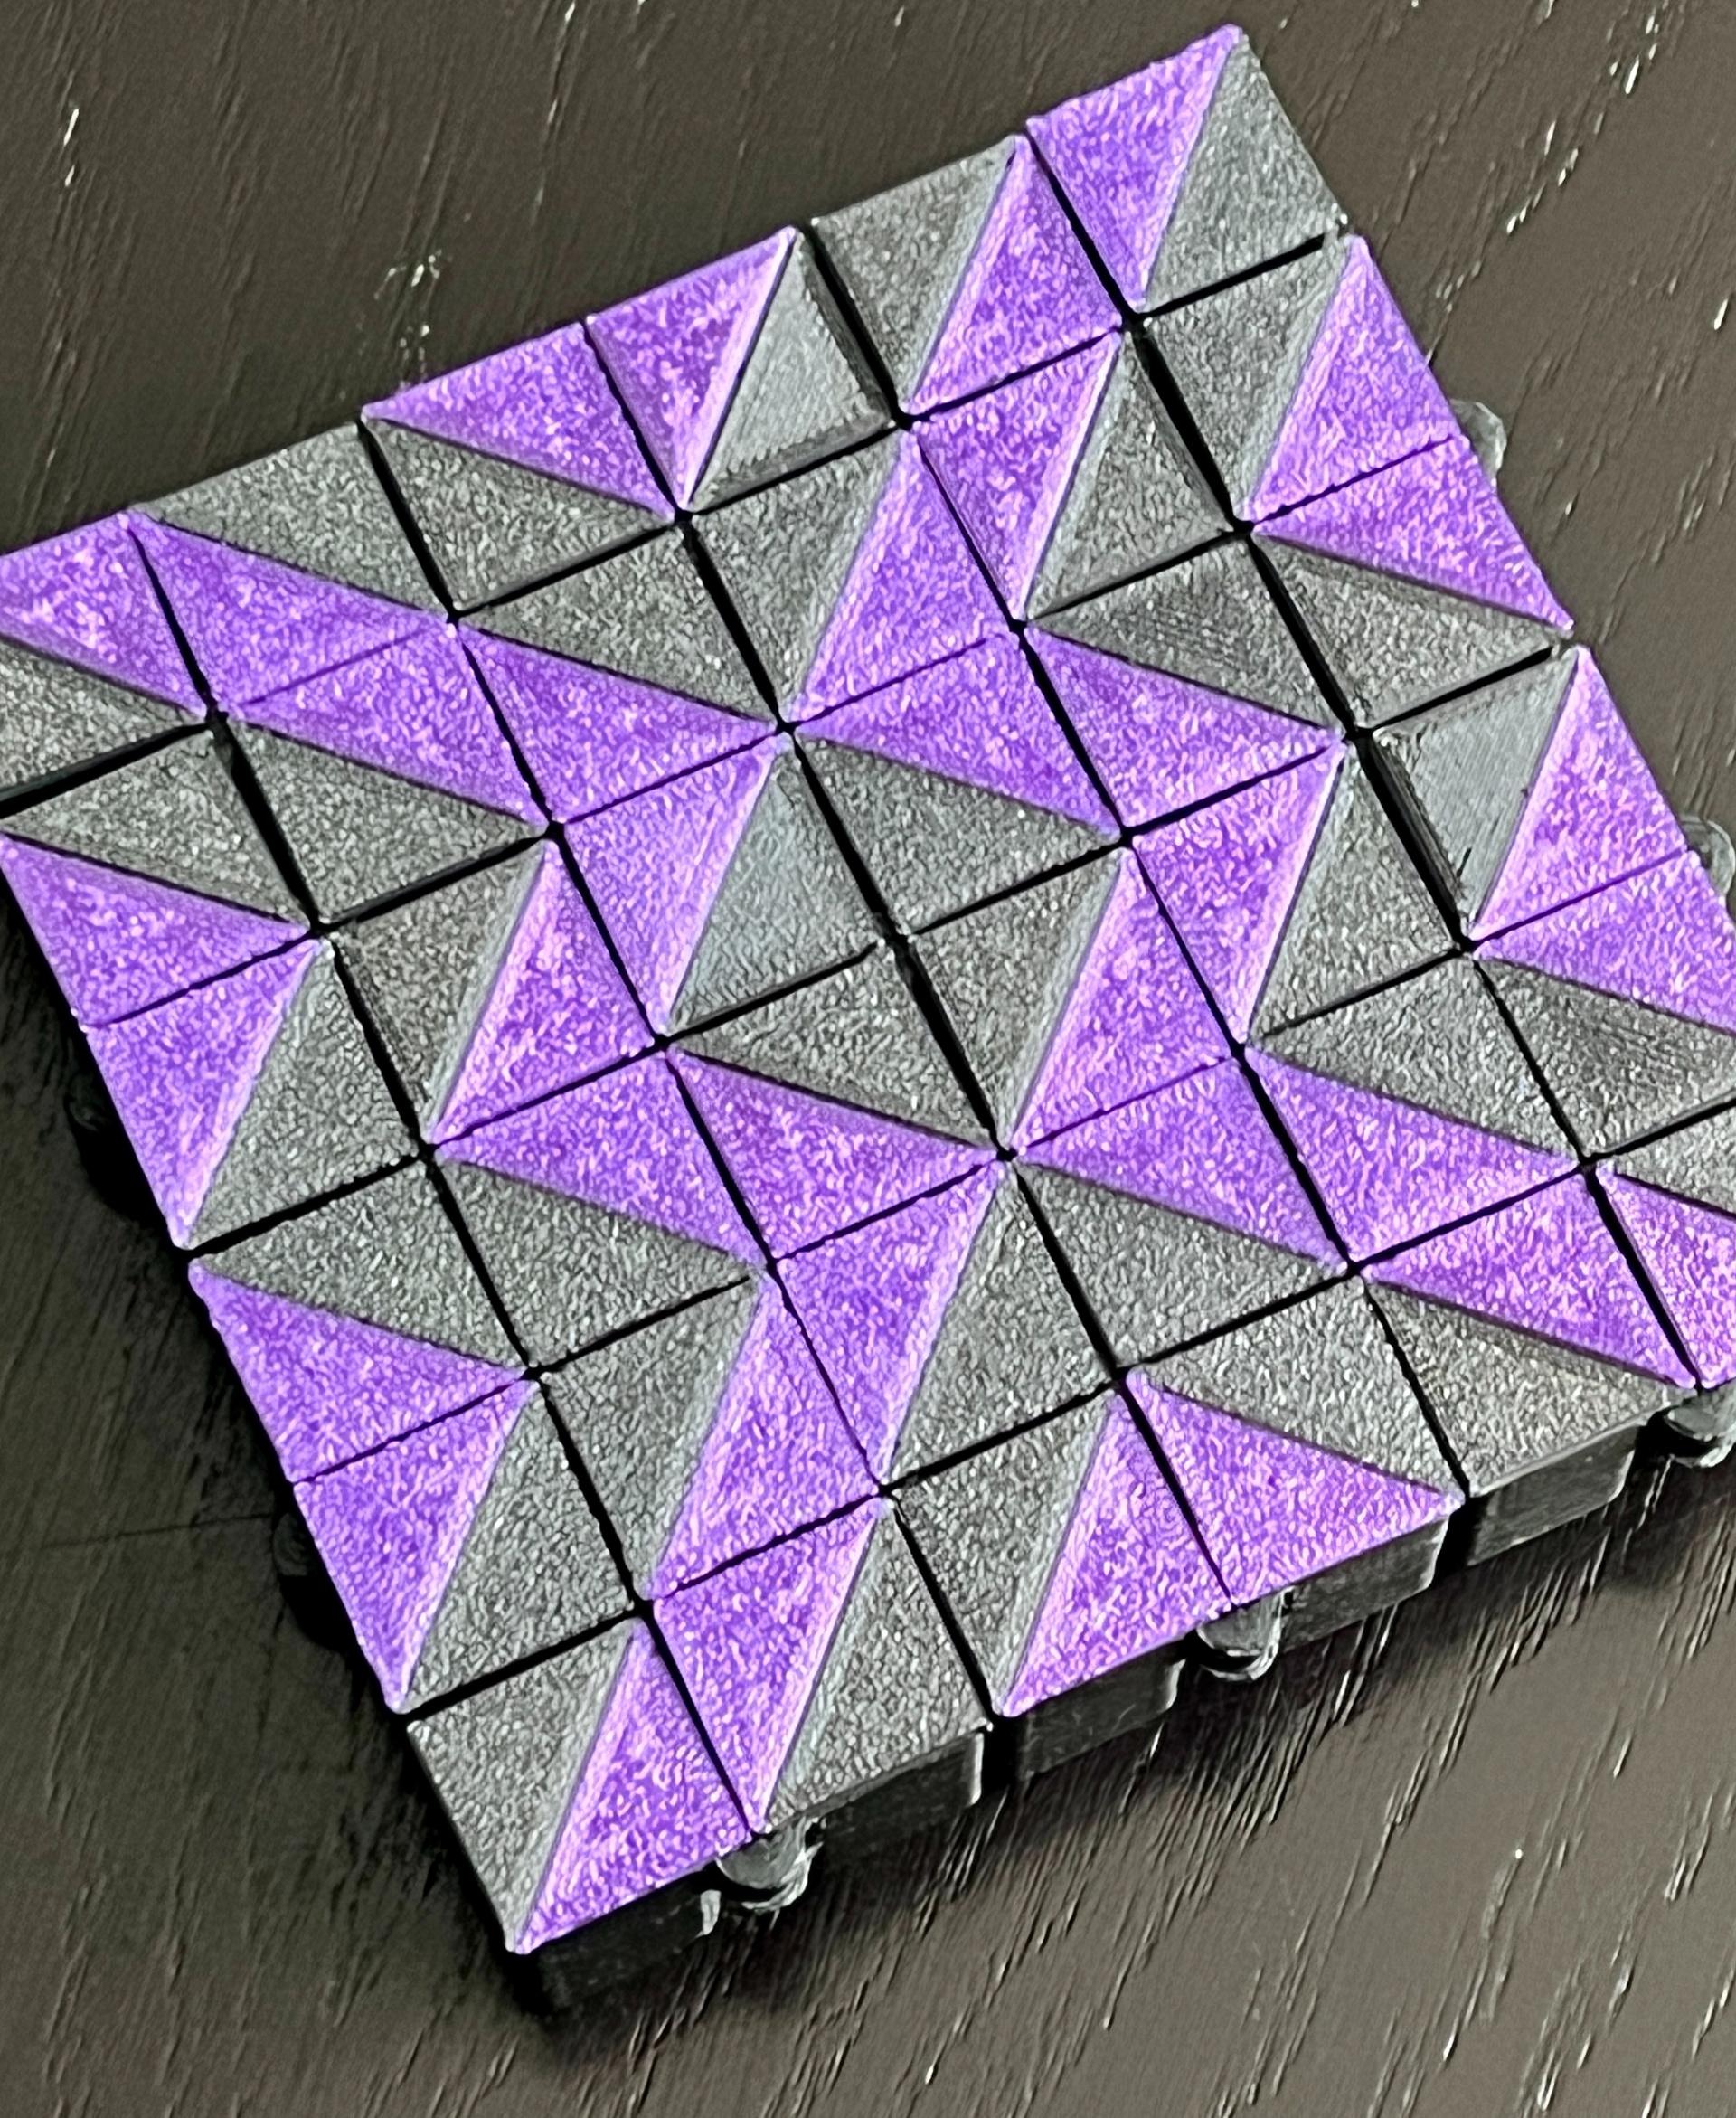 Auxetic Tile // 18mm Diagonal Split - It didn't let me do all of my pictures and I'm trying again. Hope you like it! - 3d model